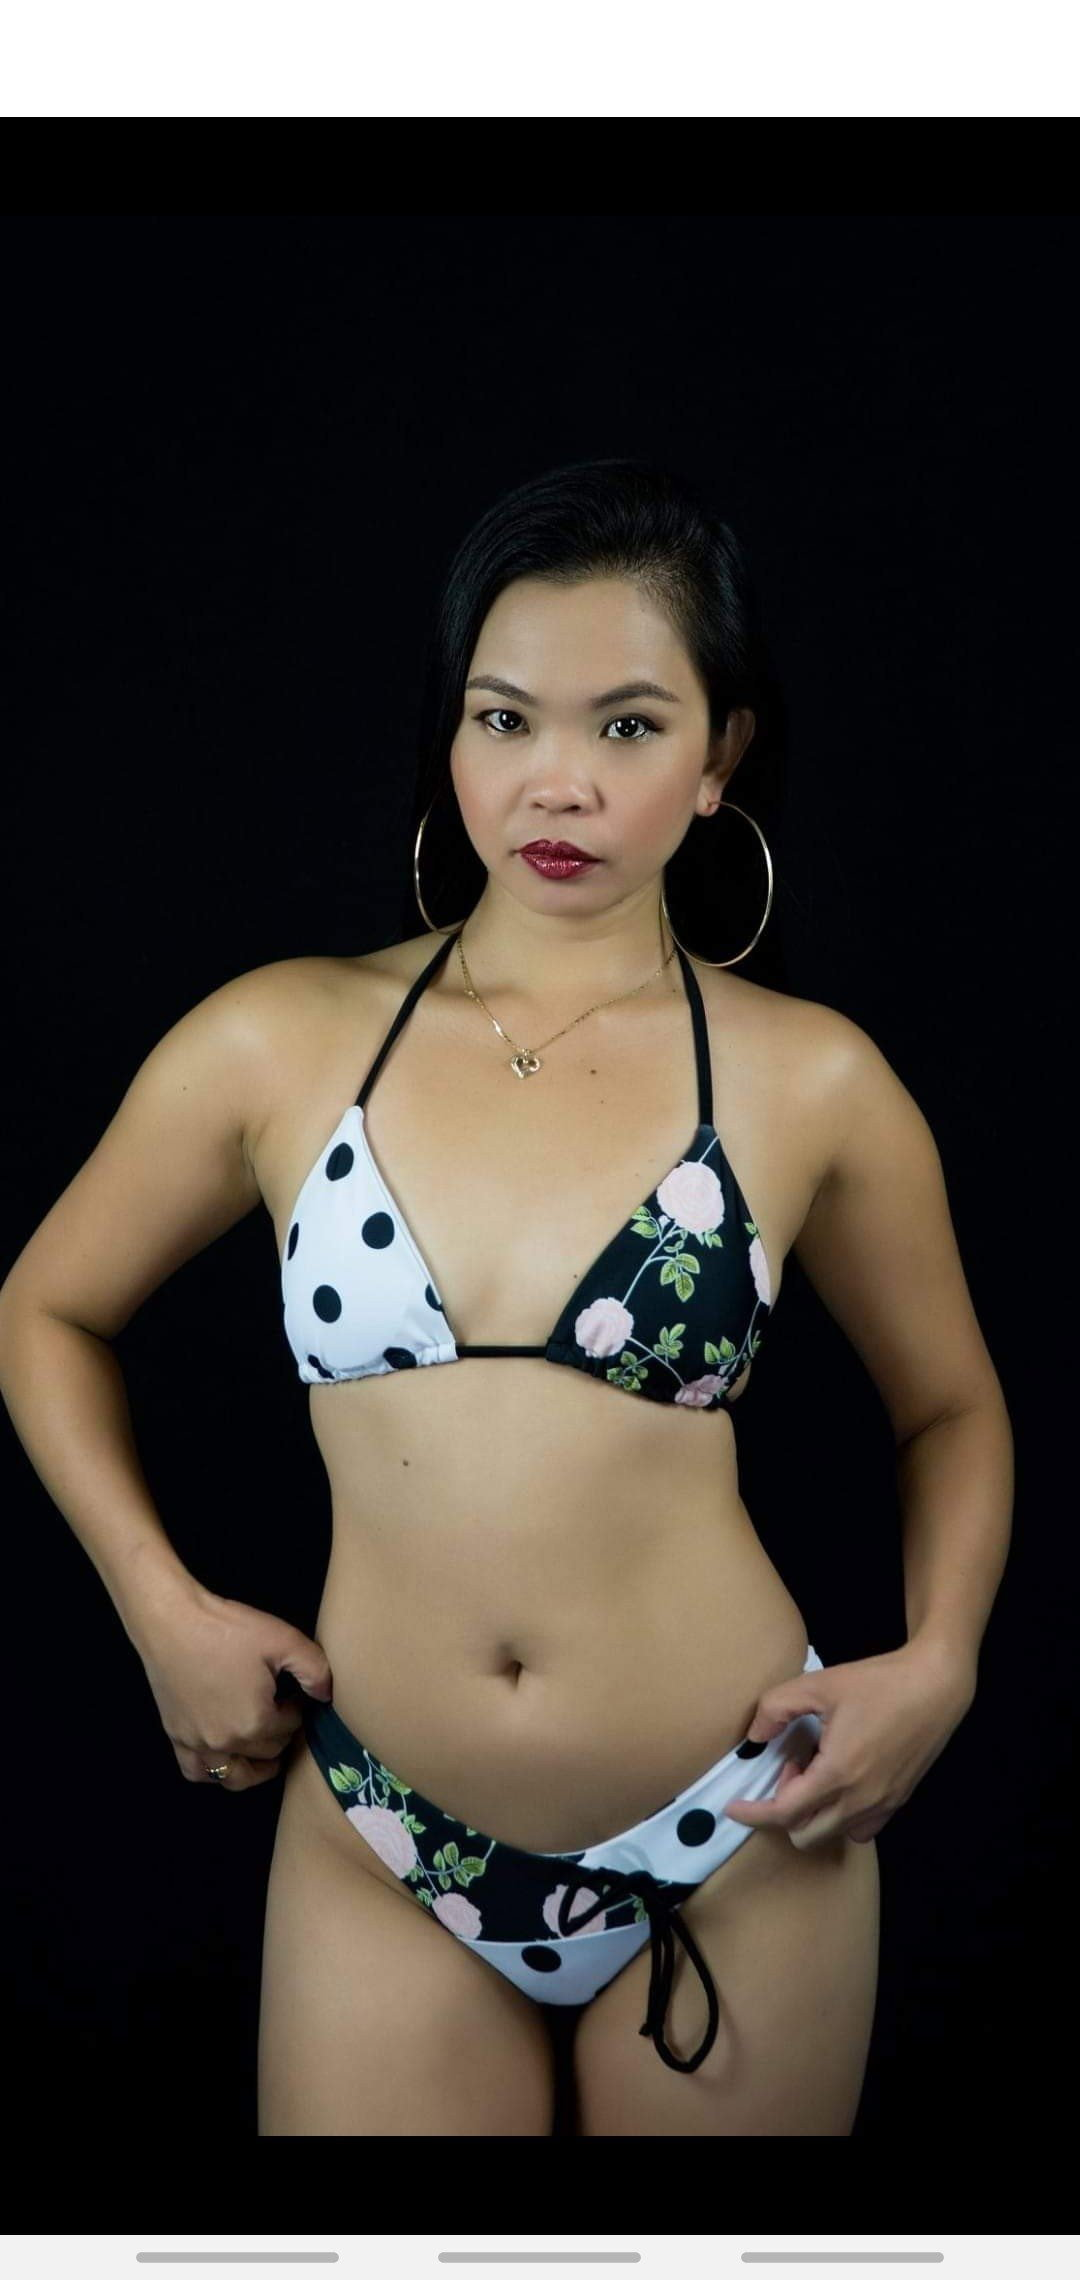 Watch the Photo by TheRod64 with the username @TheRod64, posted on May 1, 2022. The post is about the topic Pinay. and the text says 'some of my #pinay collection'